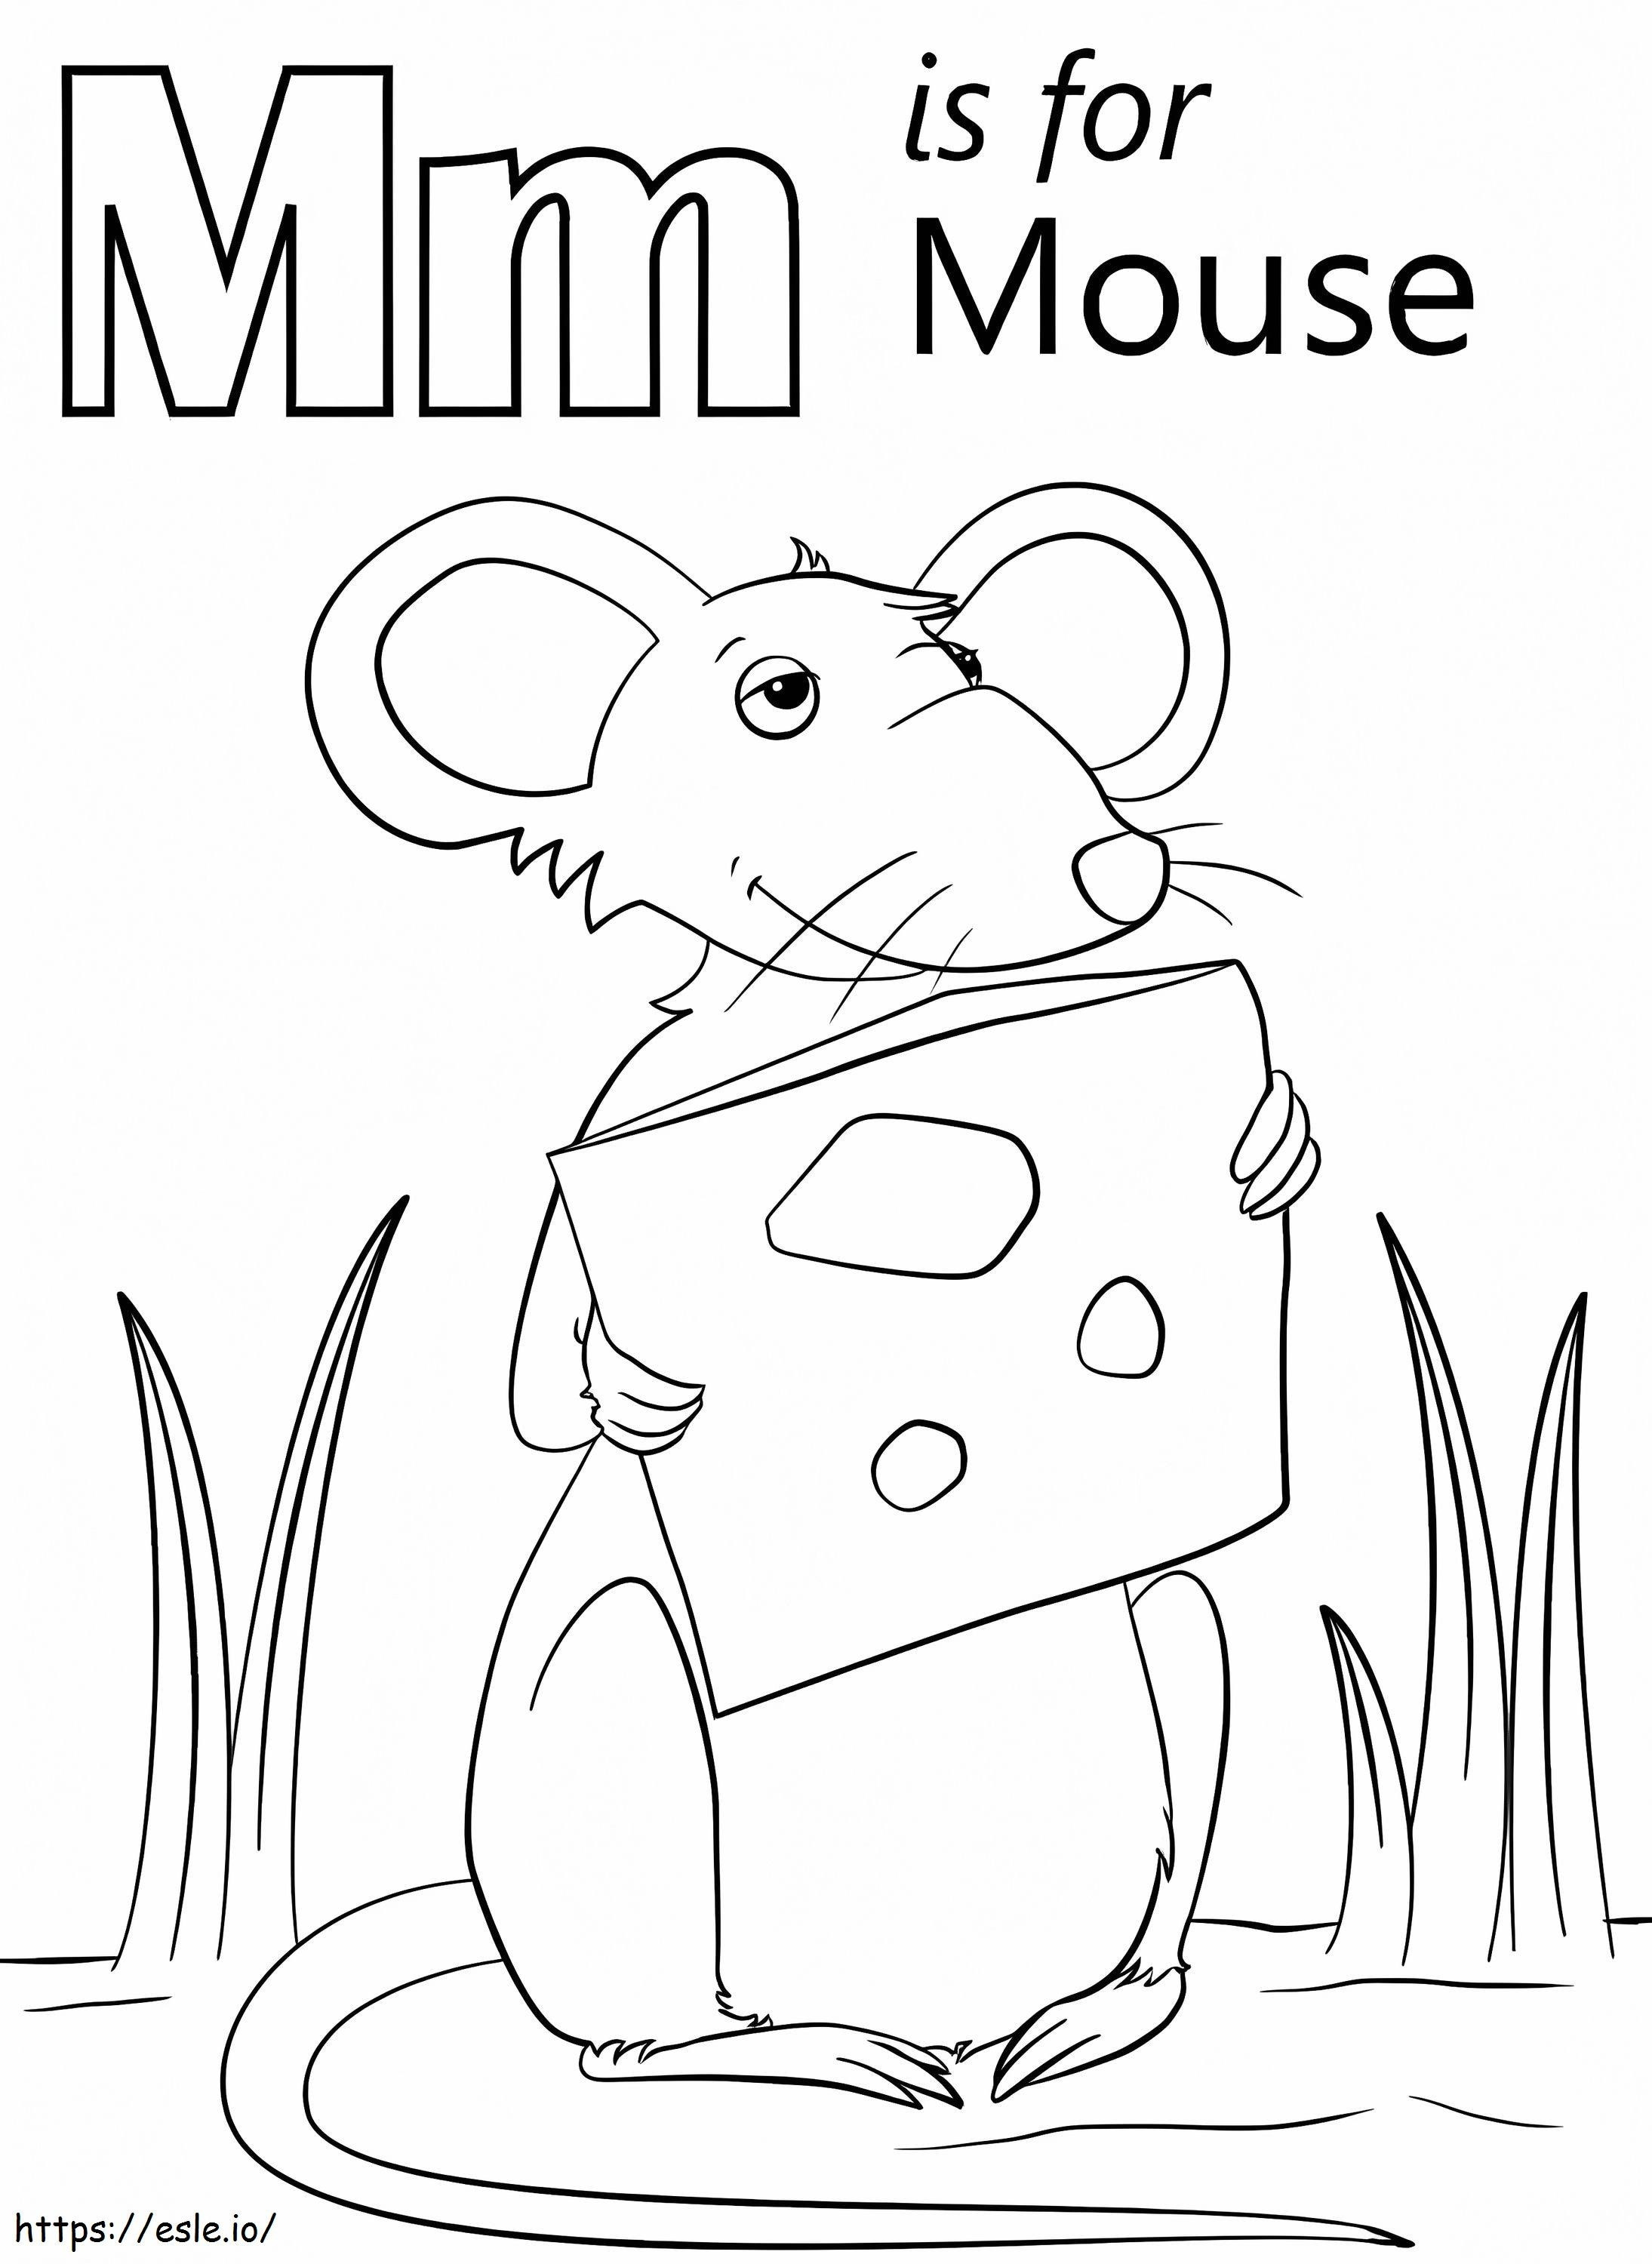 Mouse Letter M coloring page